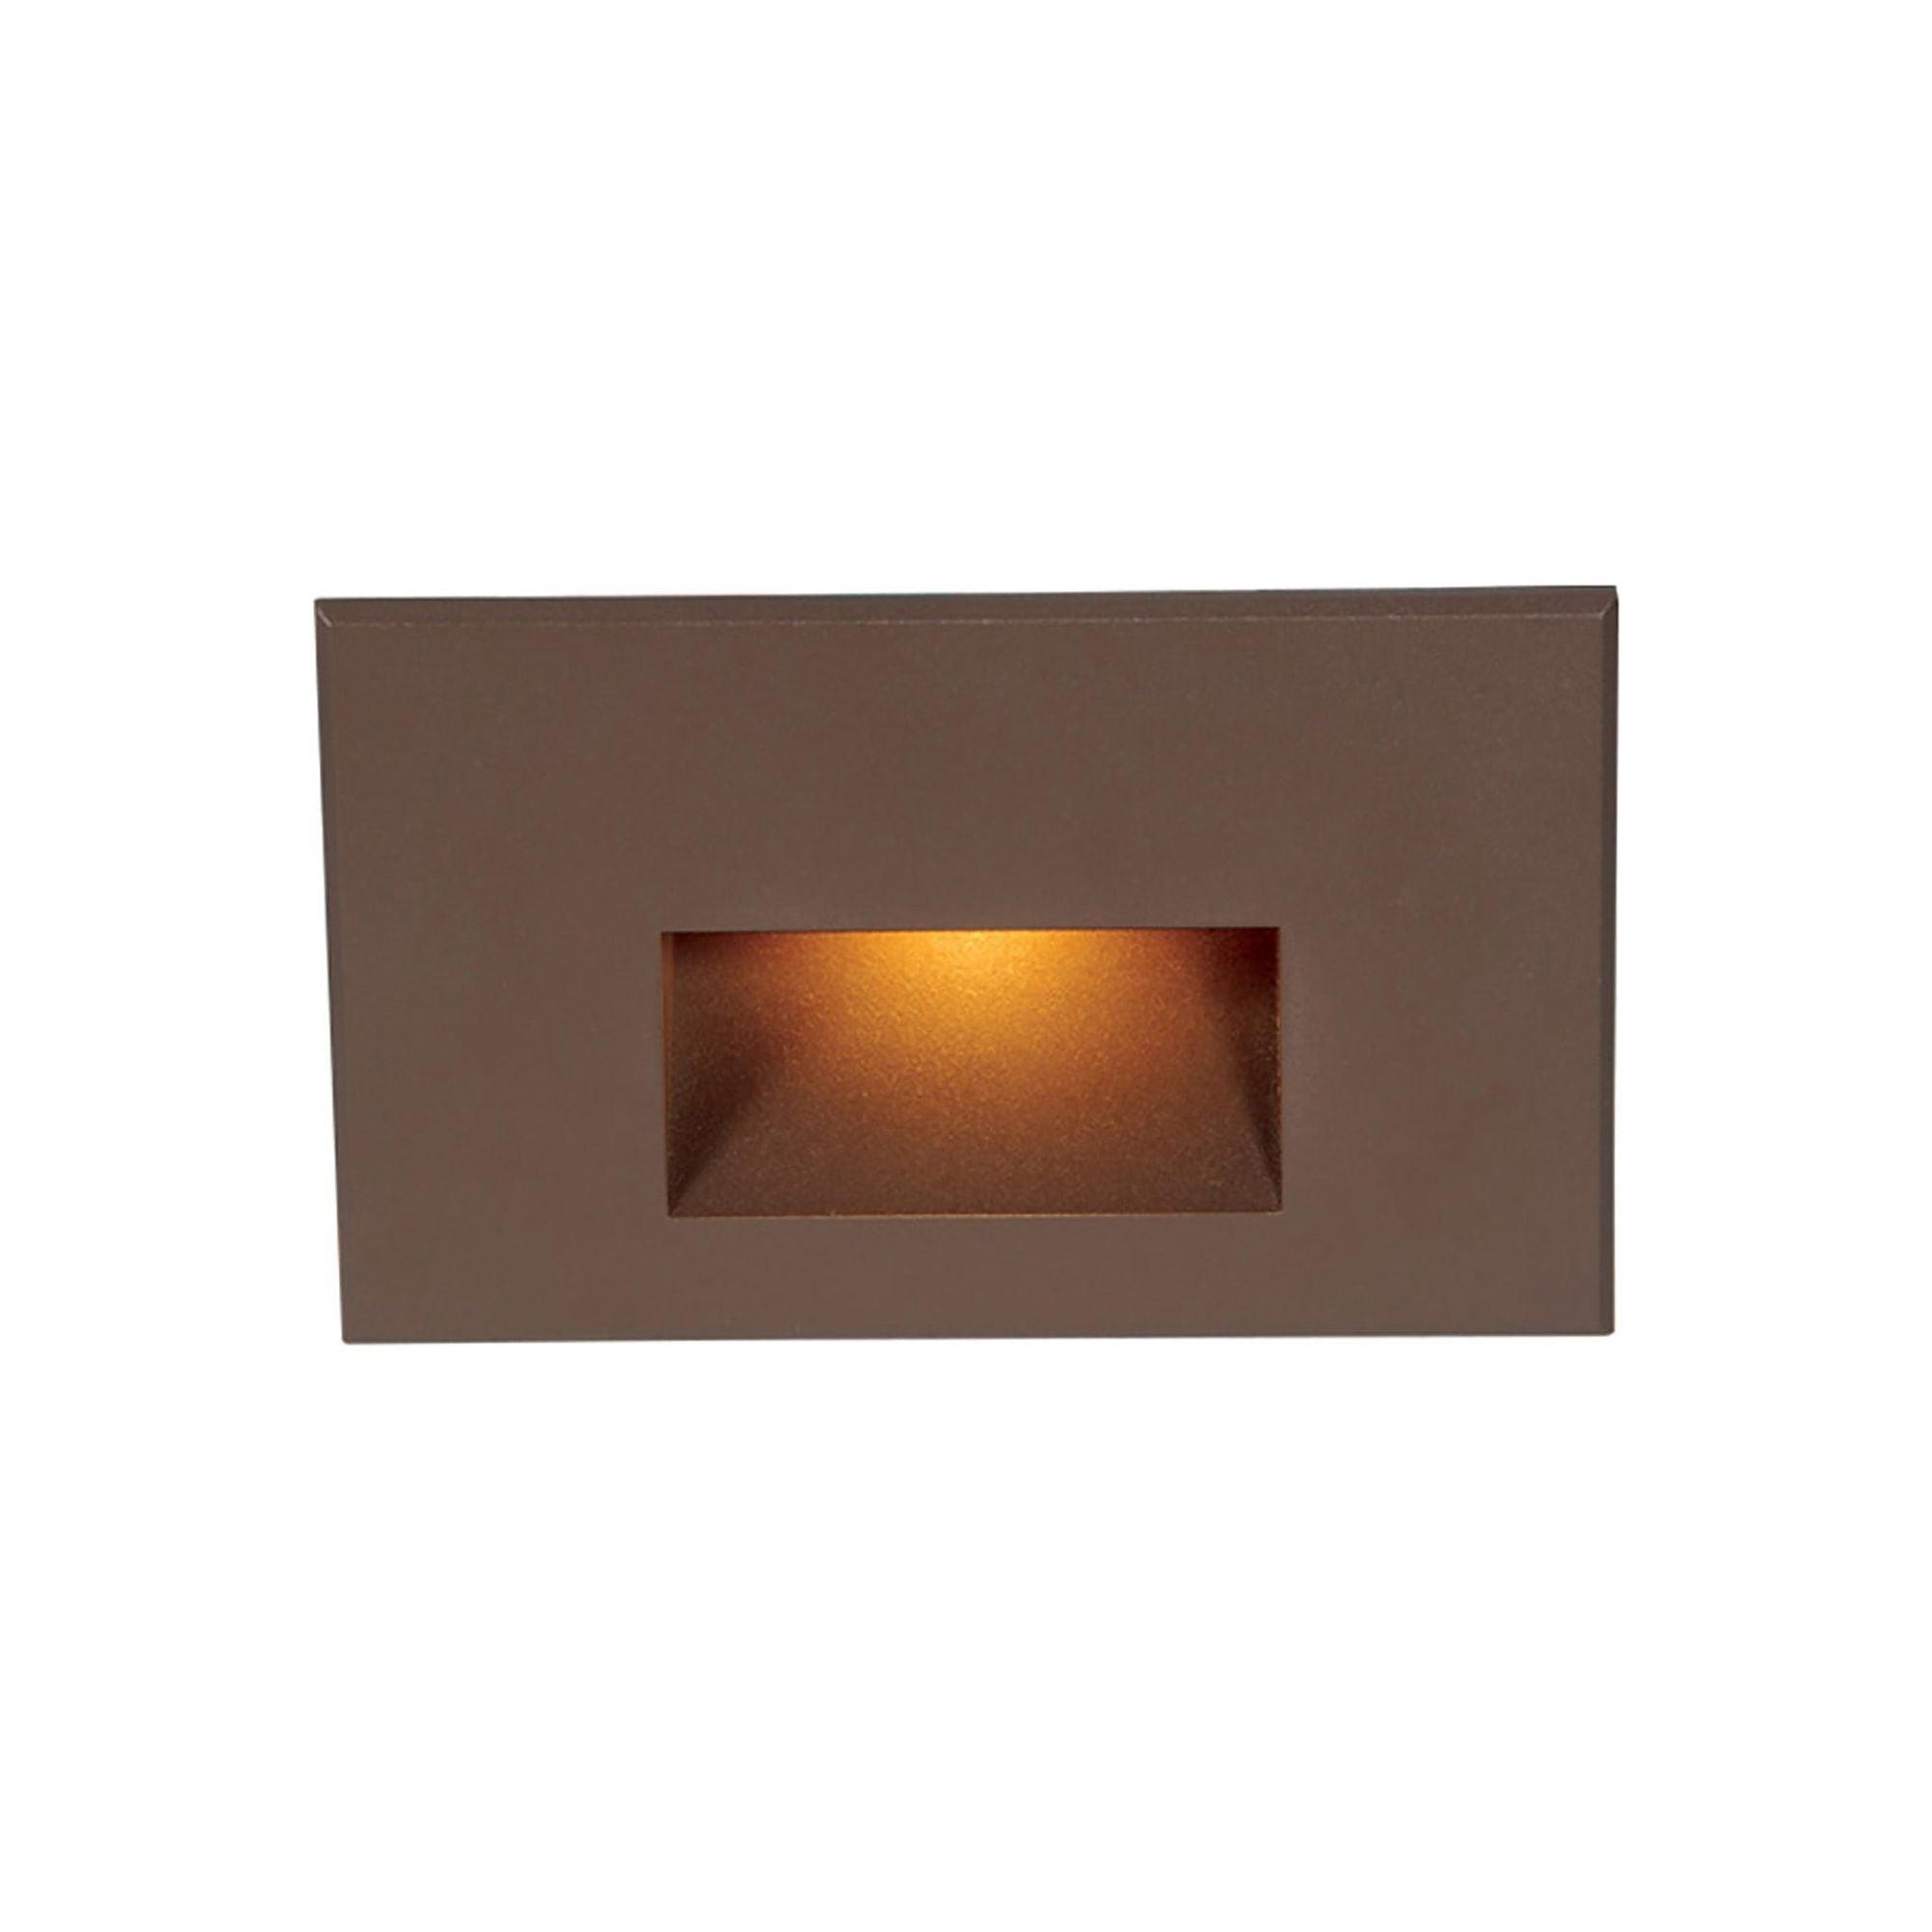 WAC Lighting - LED 12V Horizontal Indoor/Outdoor Step and Wall Light - Lights Canada